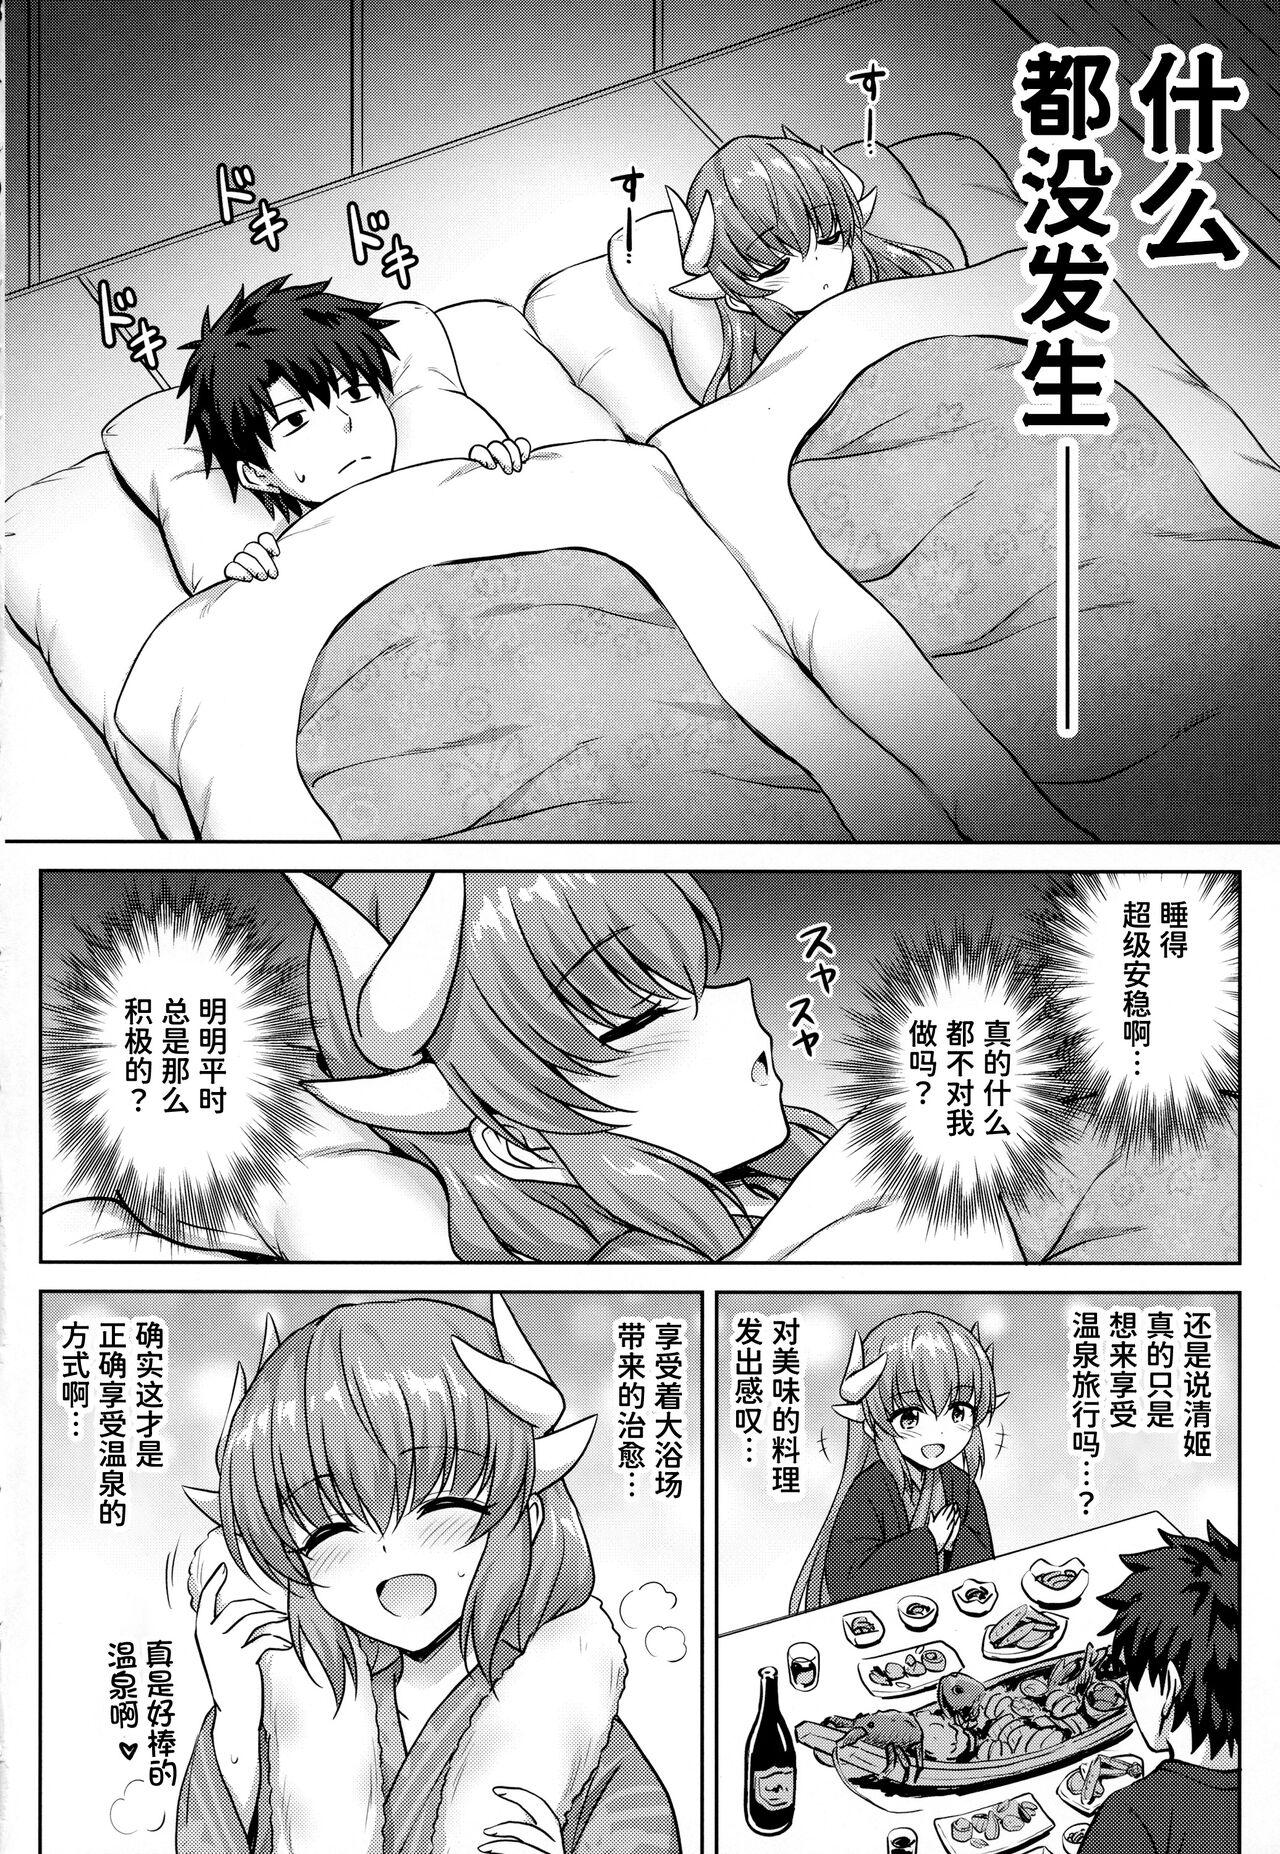 Indoor Kiyohime Onsen - Fate grand order Whooty - Page 4